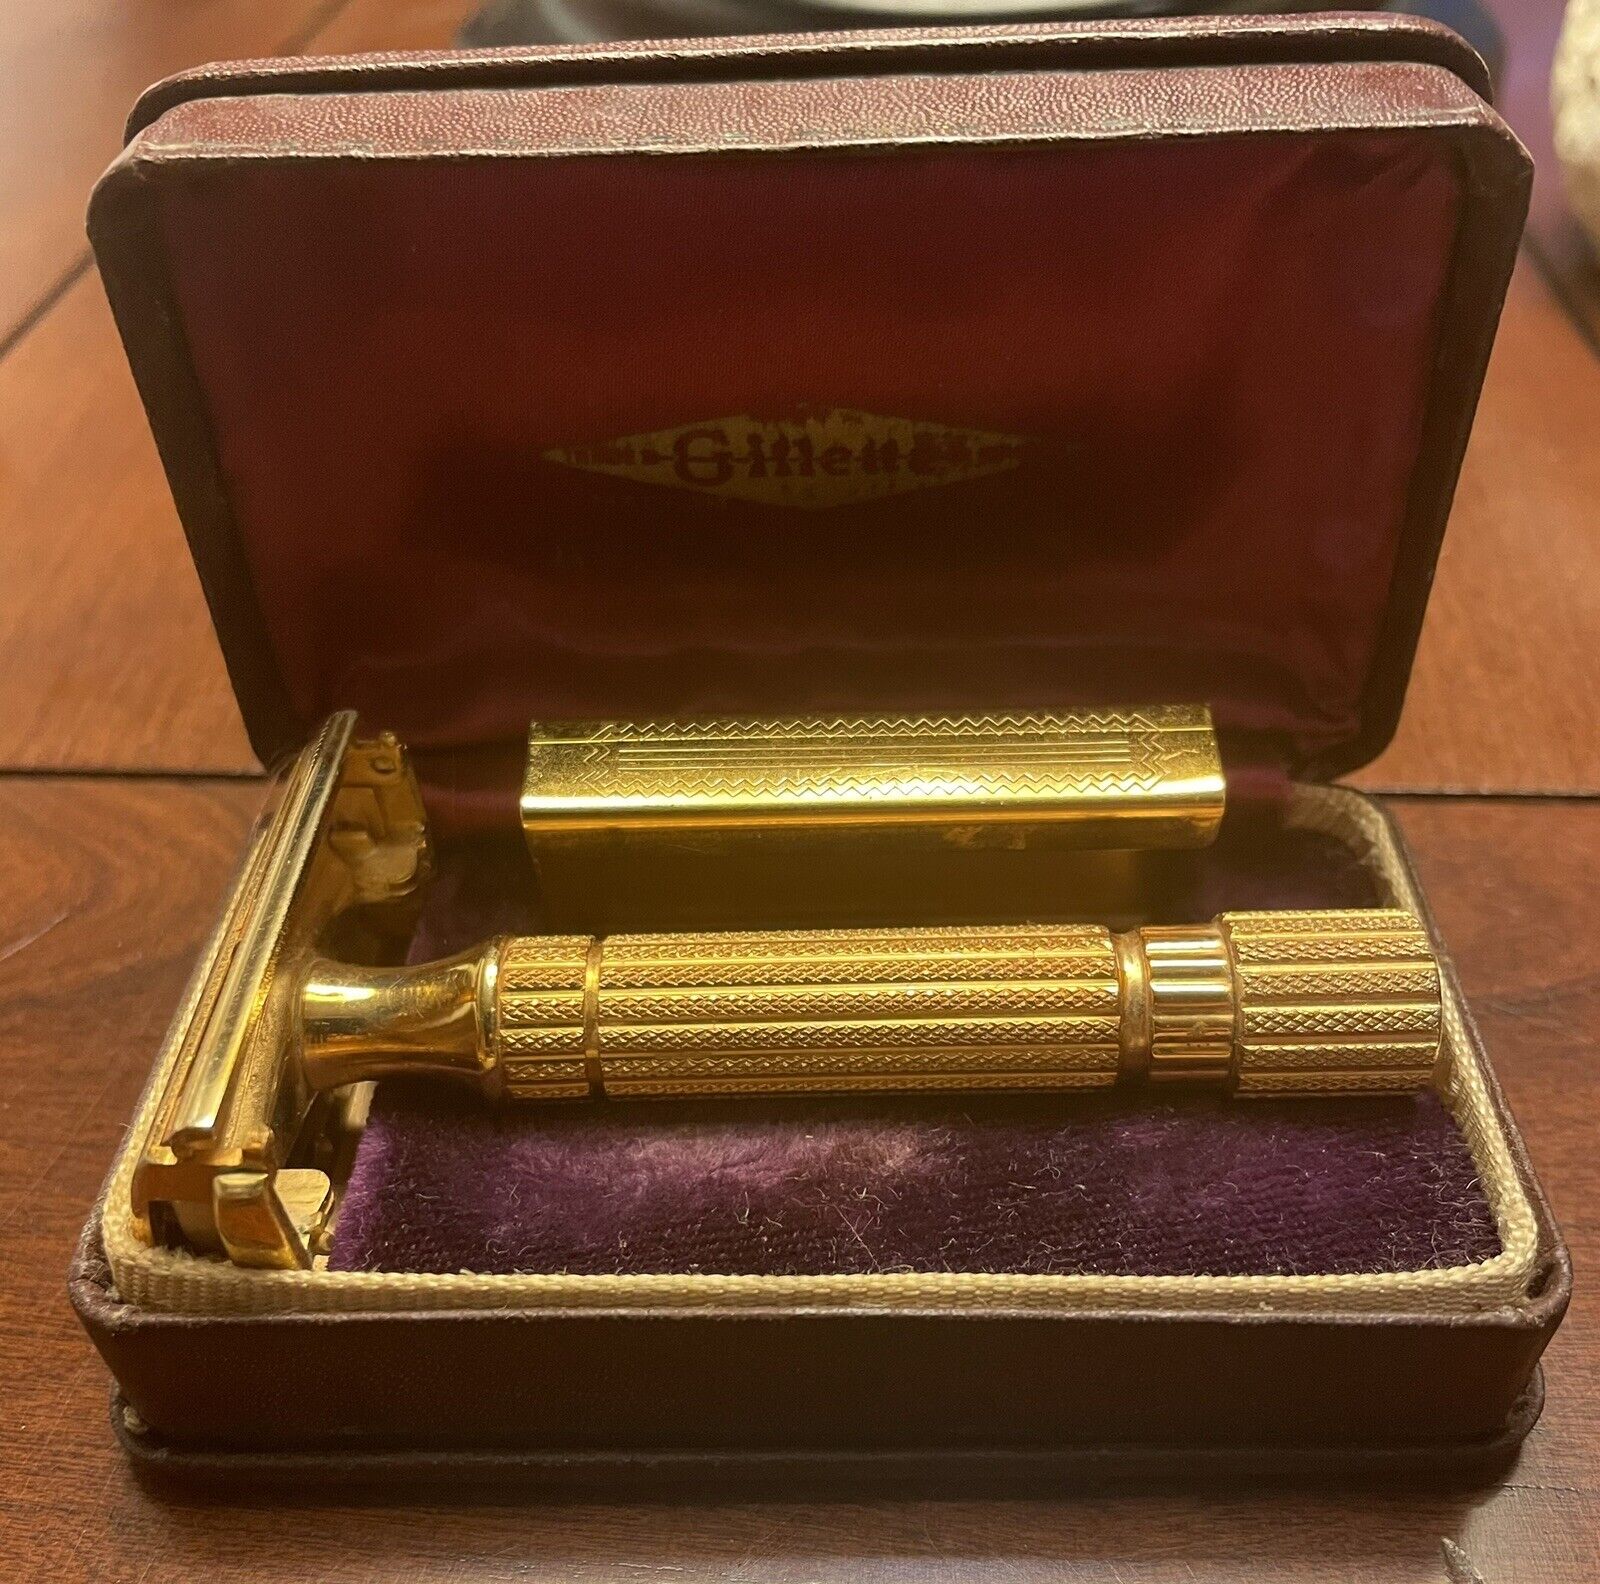 Vintage 1940s Gillette Aristocrats Safety Razor Gold Plated Wonderful Condition